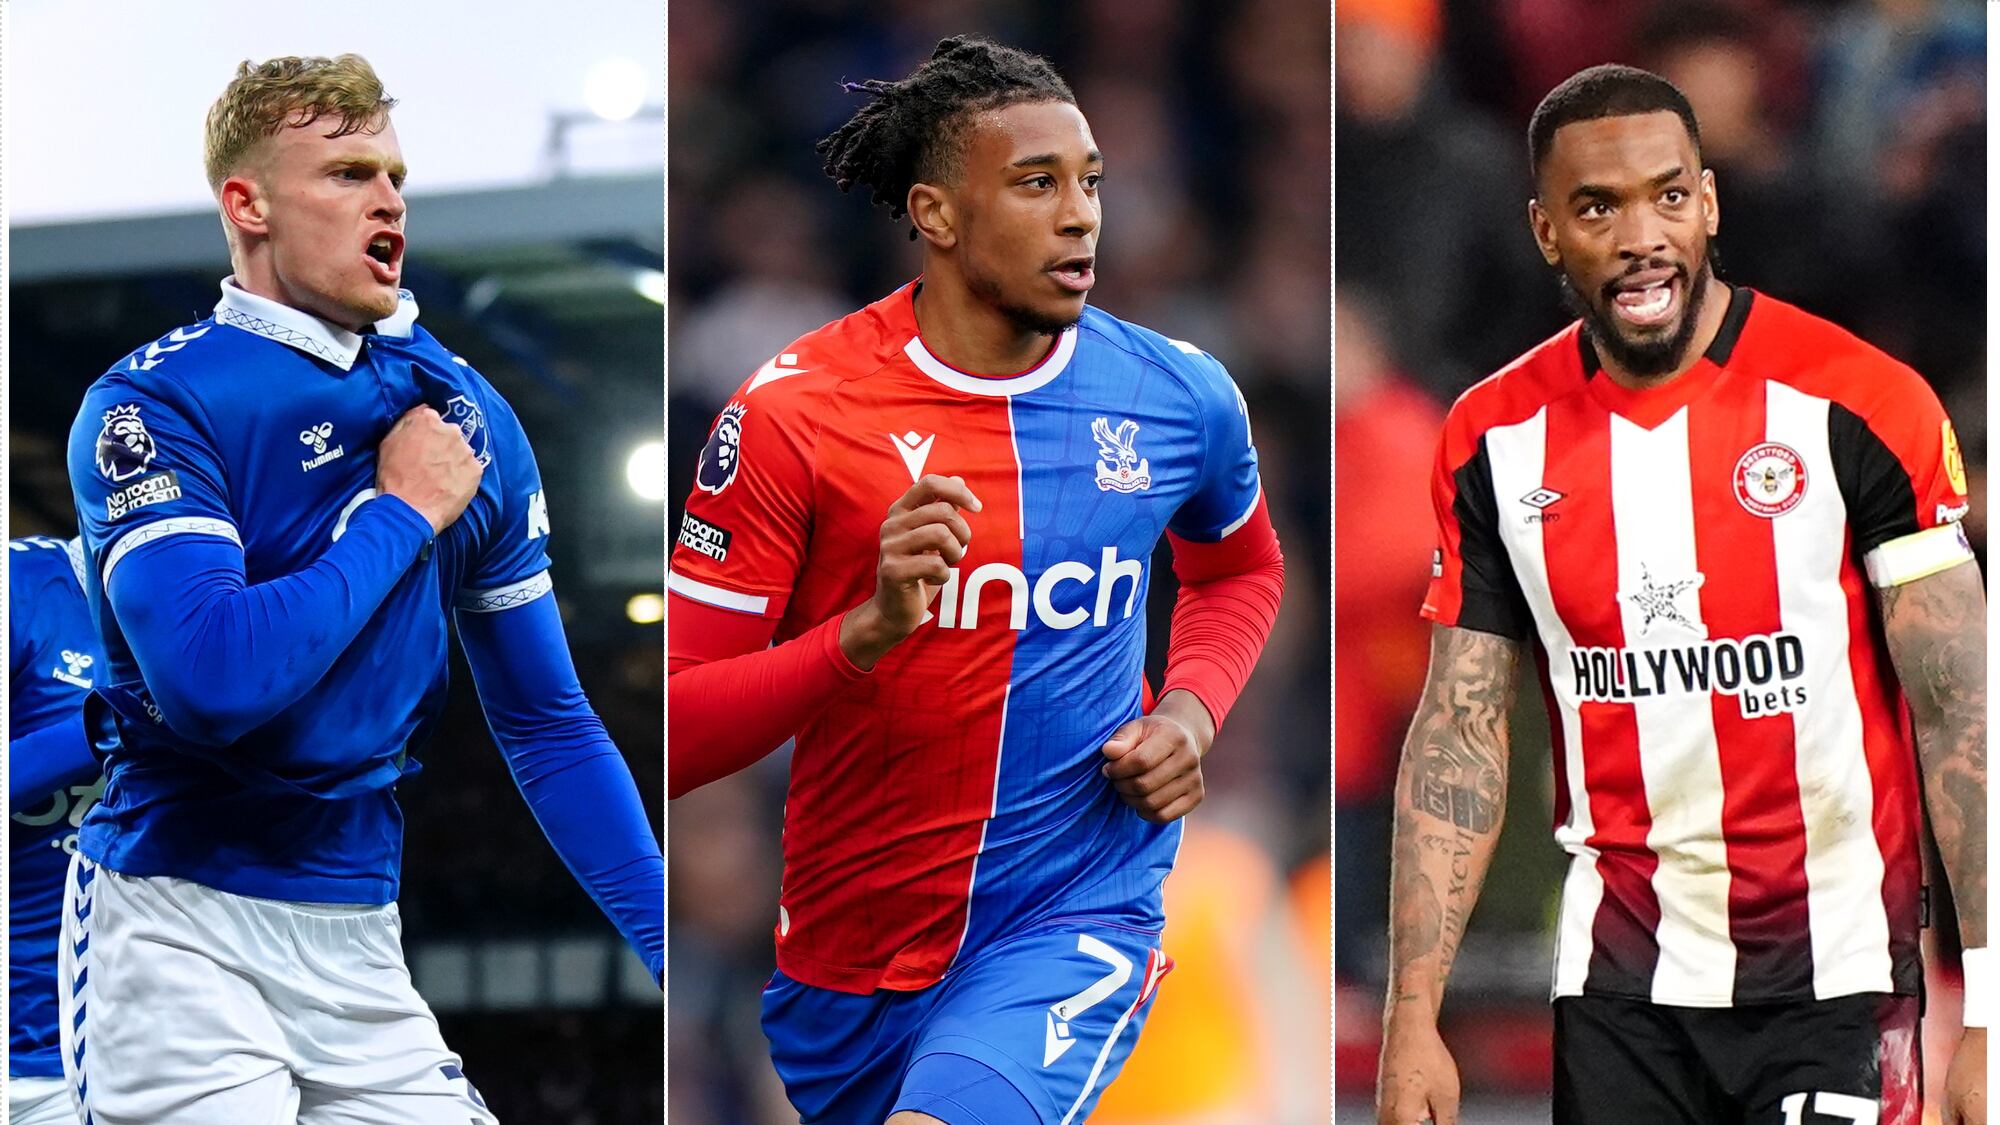 Everton’s Jarrad Branthwaite, Crystal Palace’s Michael Olise and Brentford’s Ivan Toney are likely to feature in much of the summer’s transfer speculation